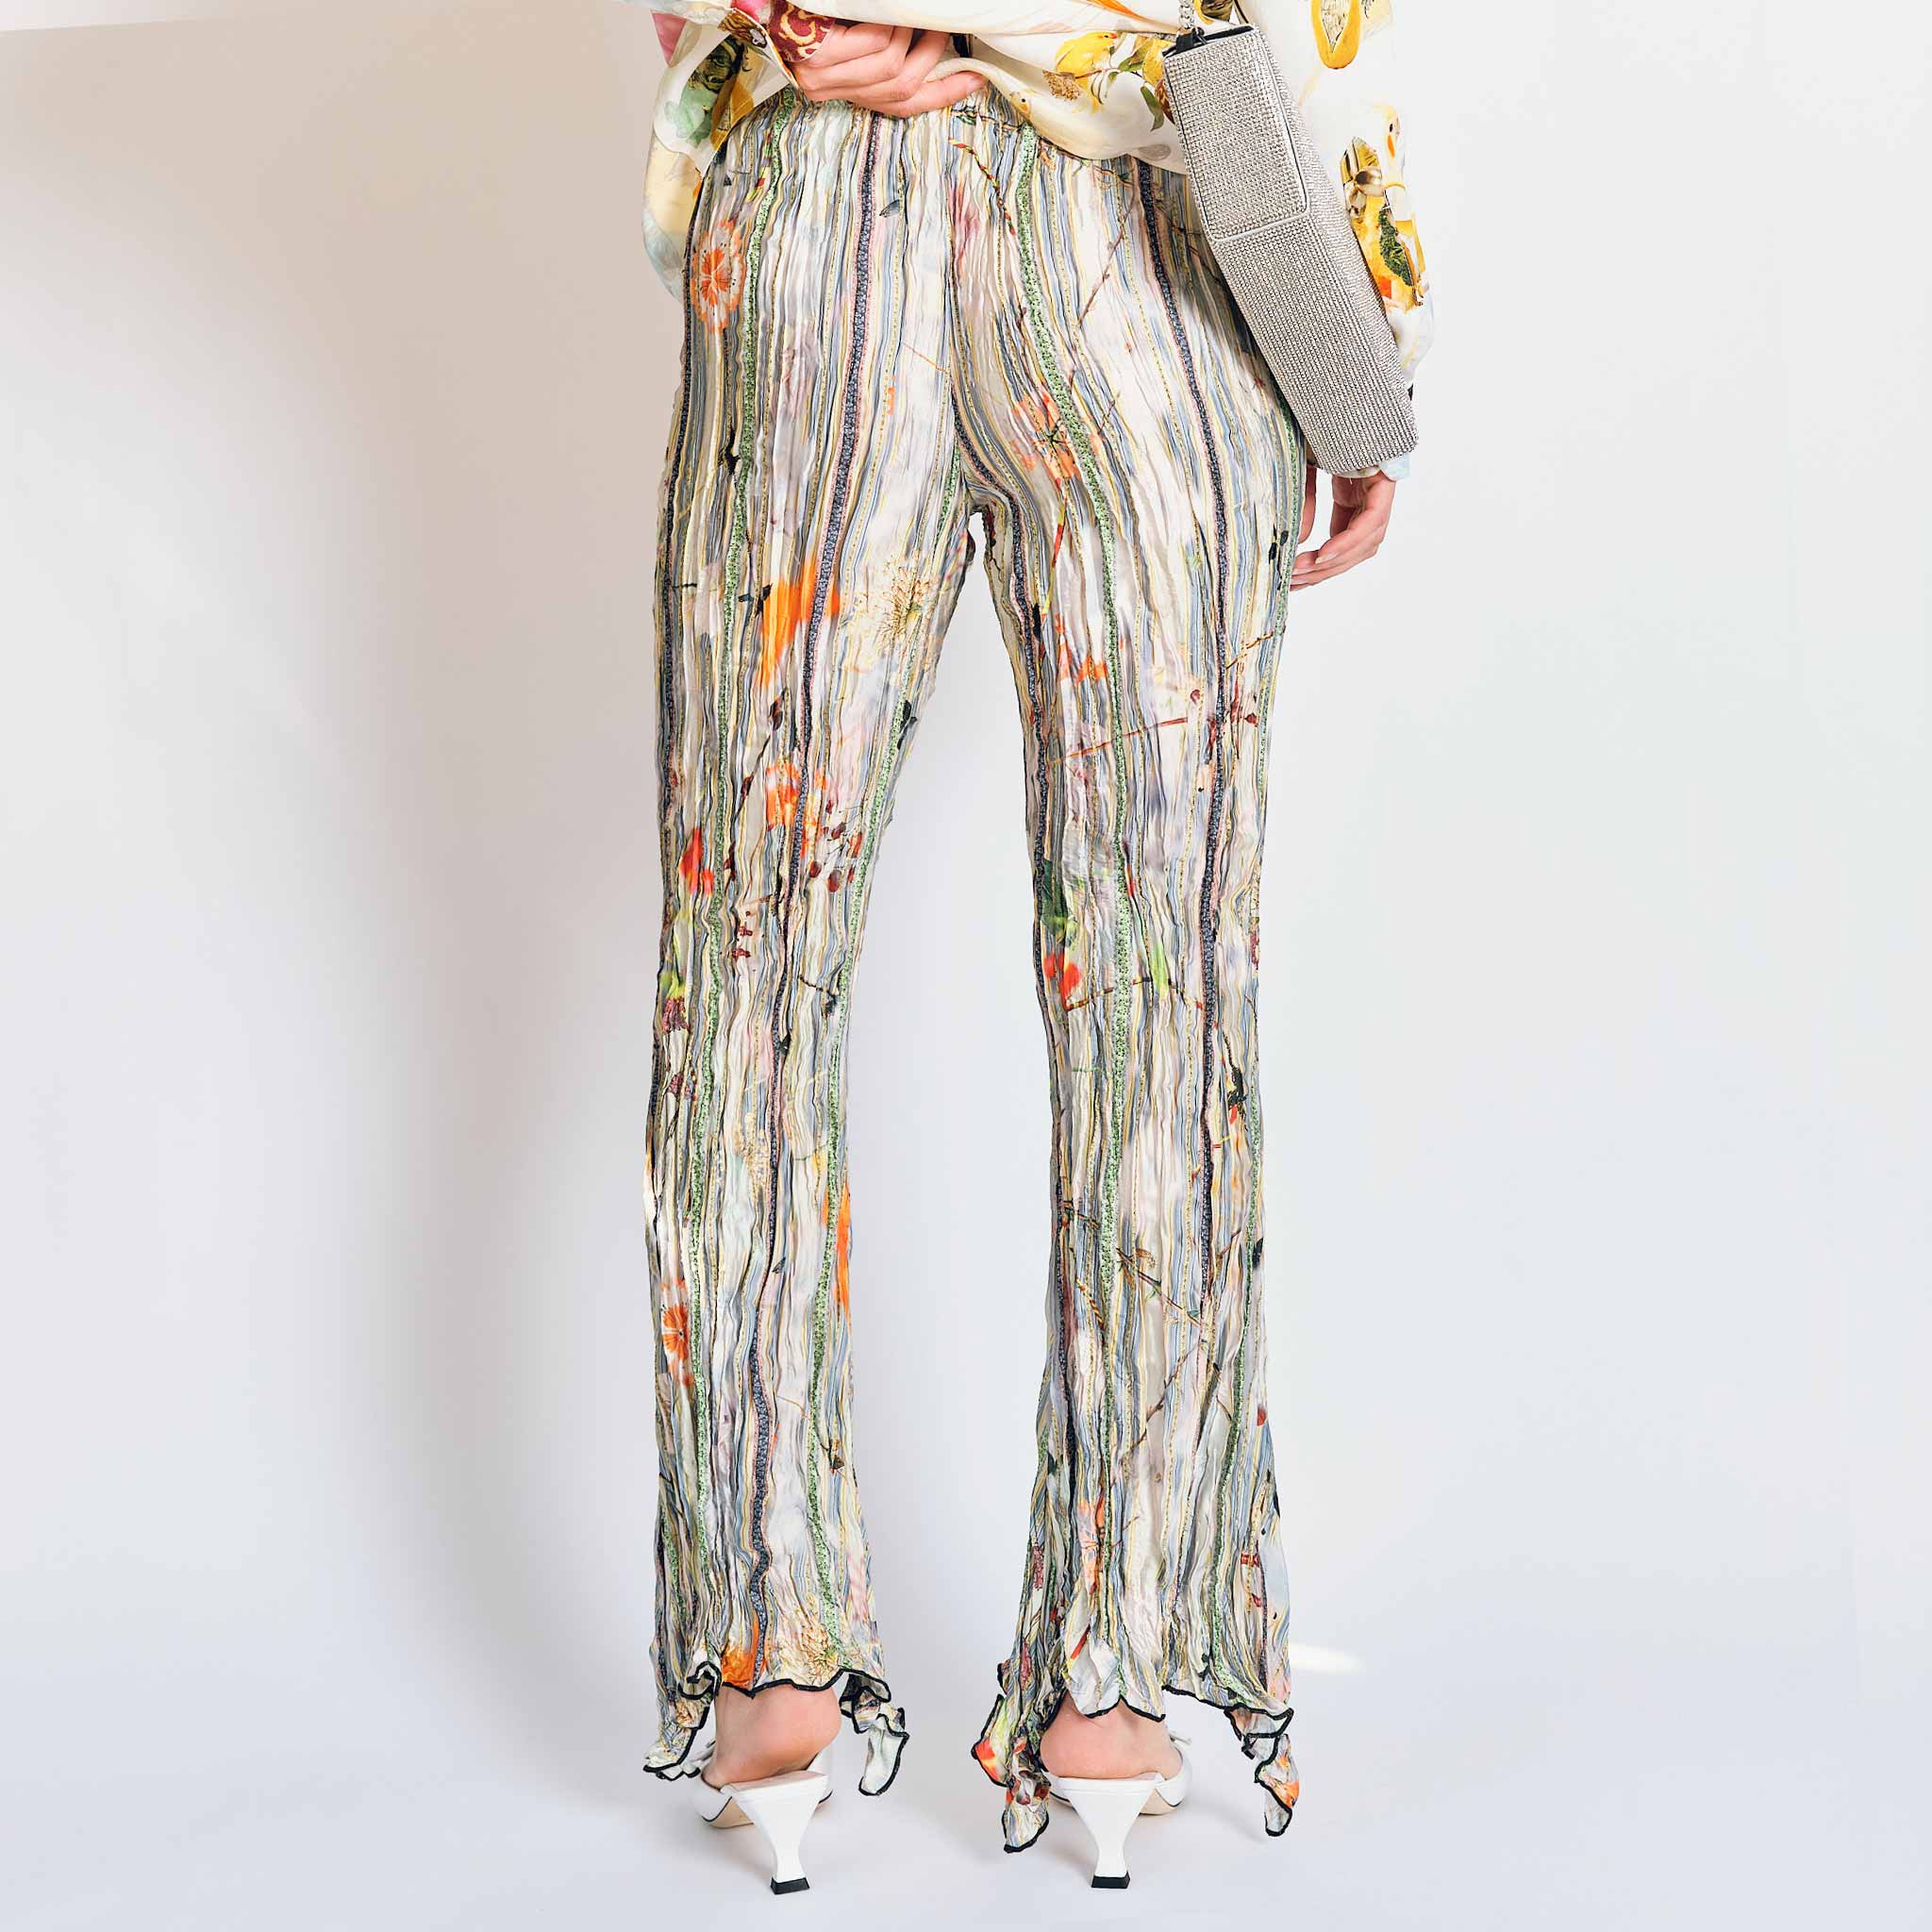 A model wears the pleated Dahlia trousers with light green, grey graphic floral print - back view.